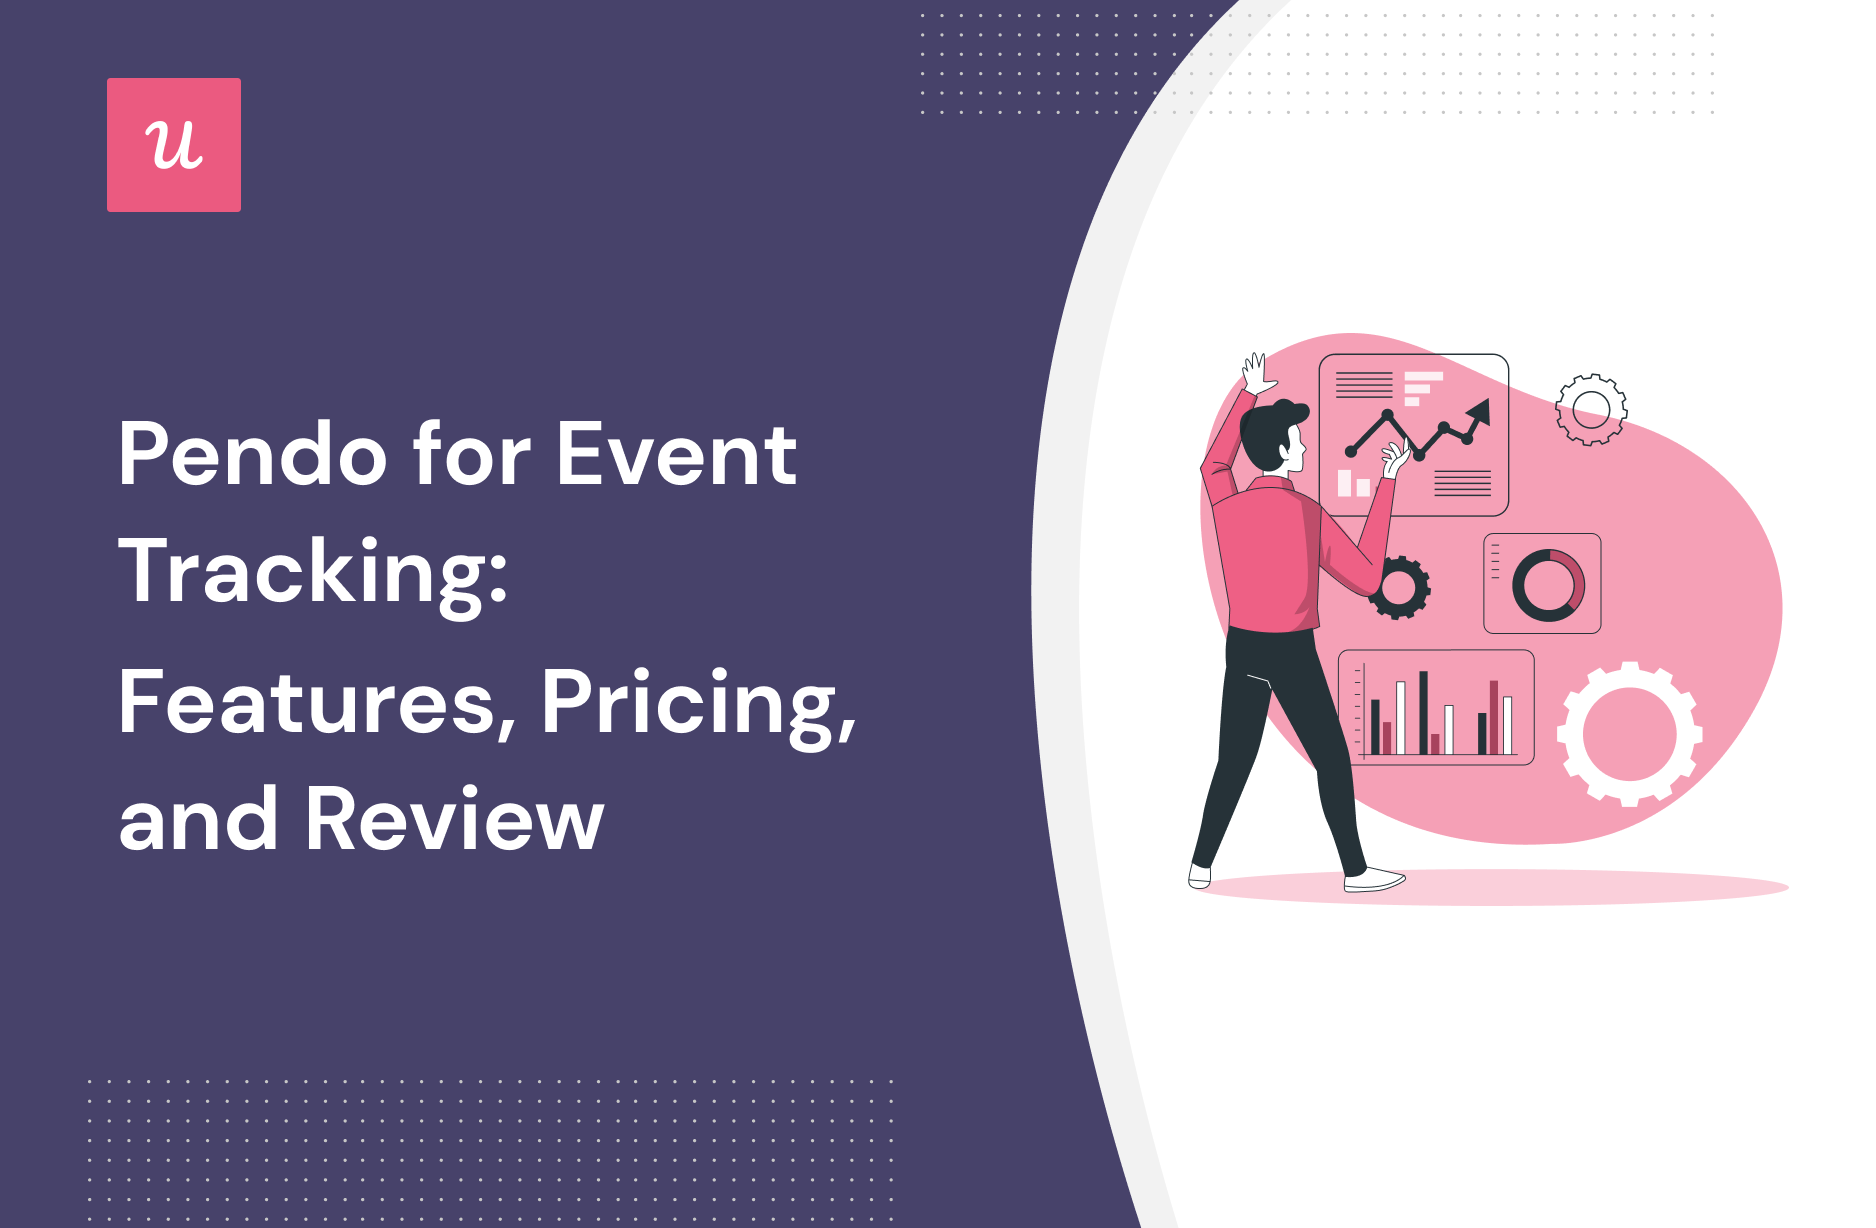 Pendo for Event Tracking: Features, Pricing, and Review